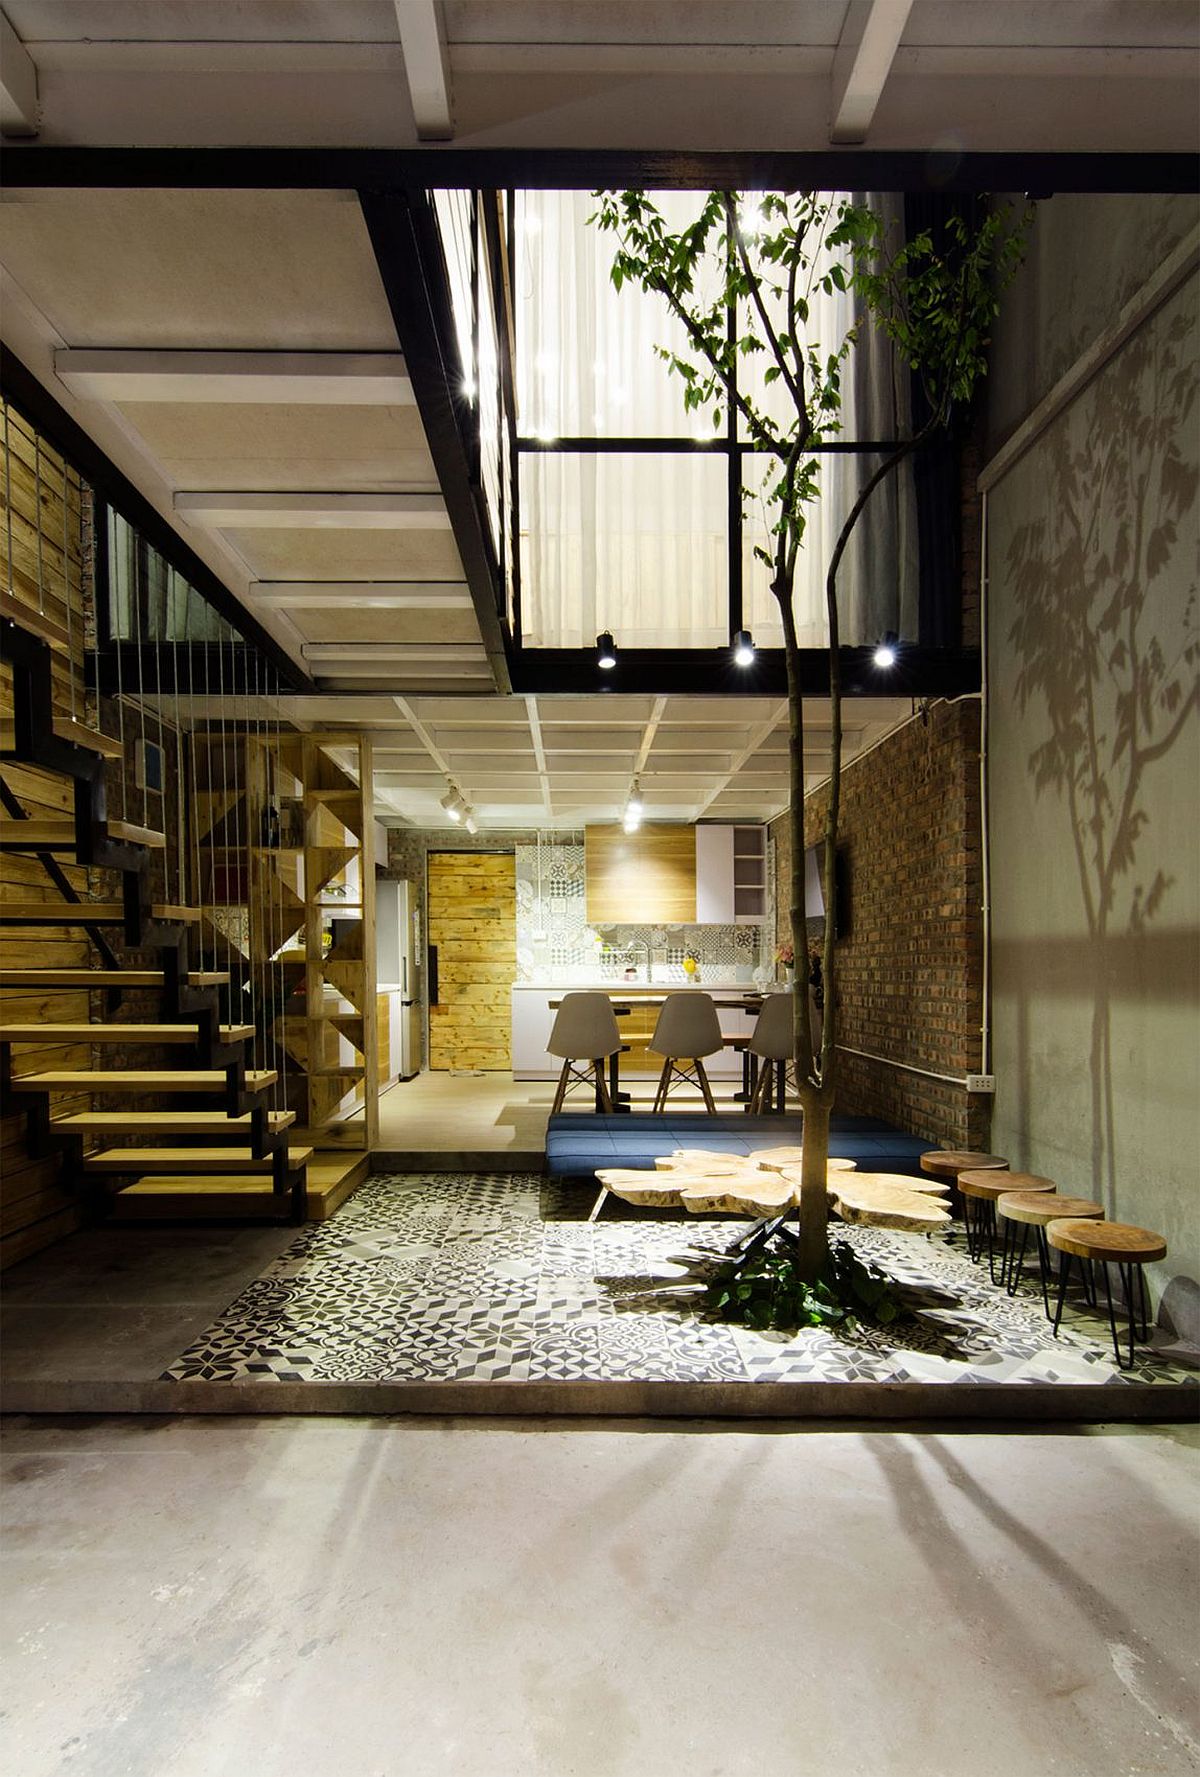 A’s House Project by Global Architects & Associates in Hanoi